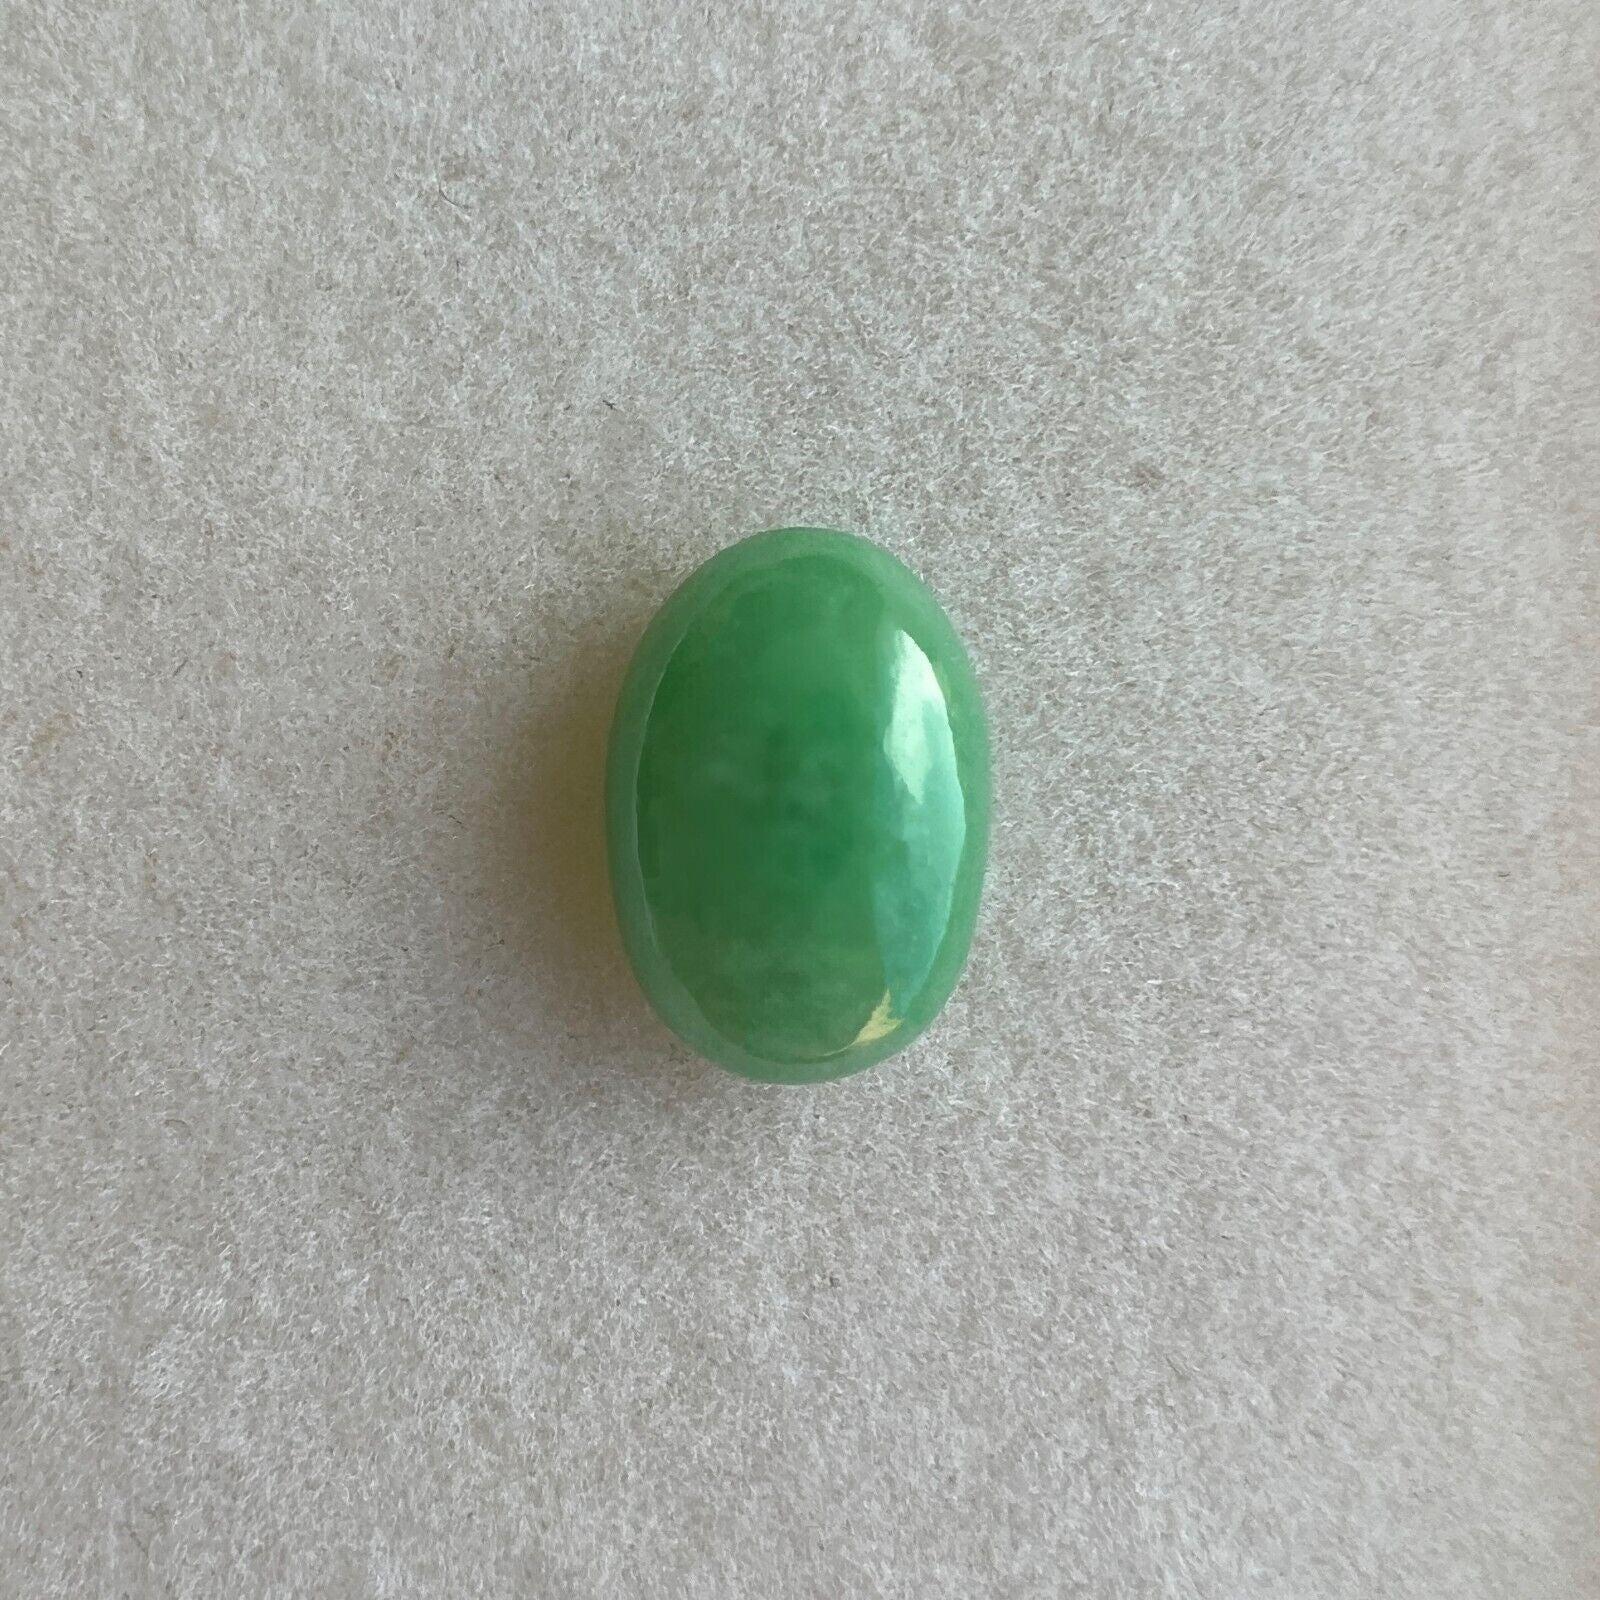 Rare 4.21ct IGI Certified Green Jadeite Jade ‘A’ Grade Oval Cabochon Loose Gem

IGI Certified Untreated A Grade Green Jadeite Gemstone.
4.21 Carat with an excellent oval cabochon cut and bright green colour. Fully certified by IGI in Antwerp